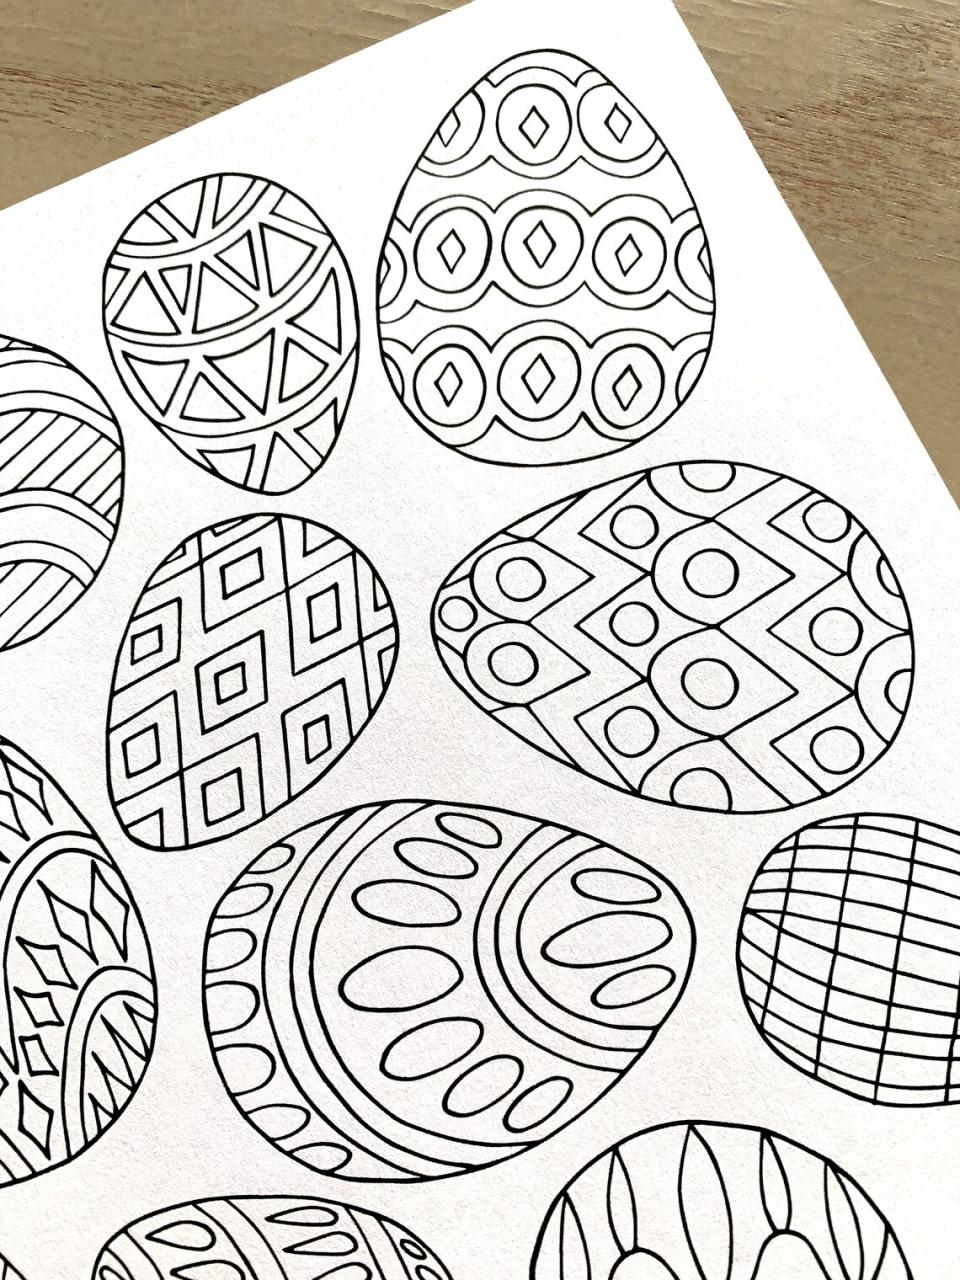 Cool Easter Egg Coloring Pages Pdf Ideas